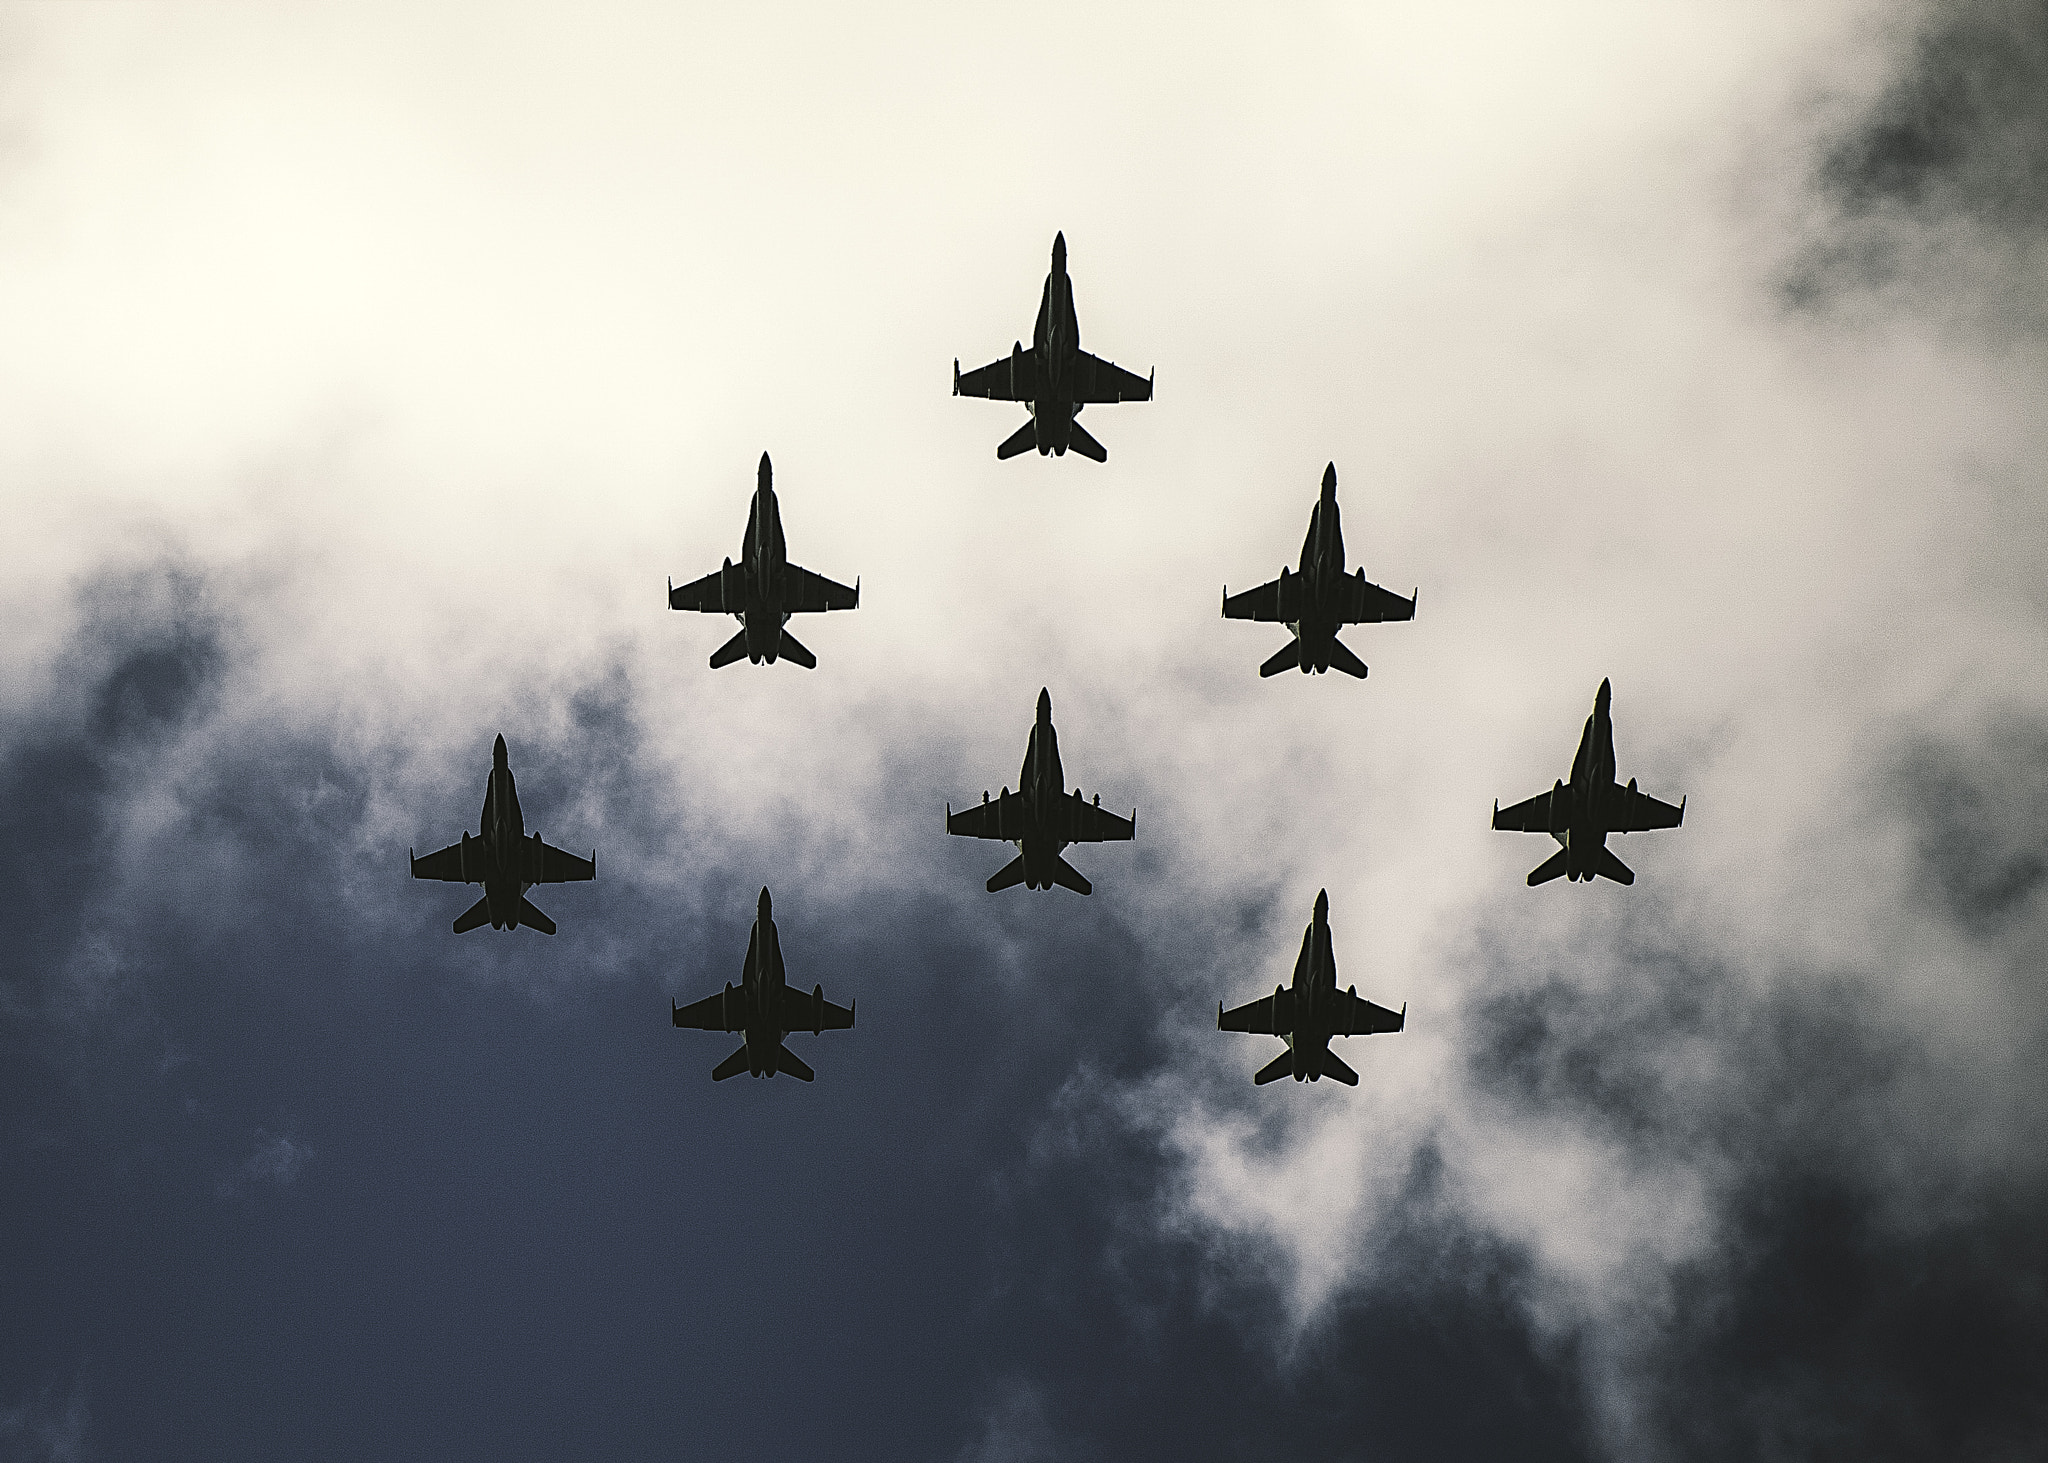 Nikon D4 sample photo. The jet formation photography